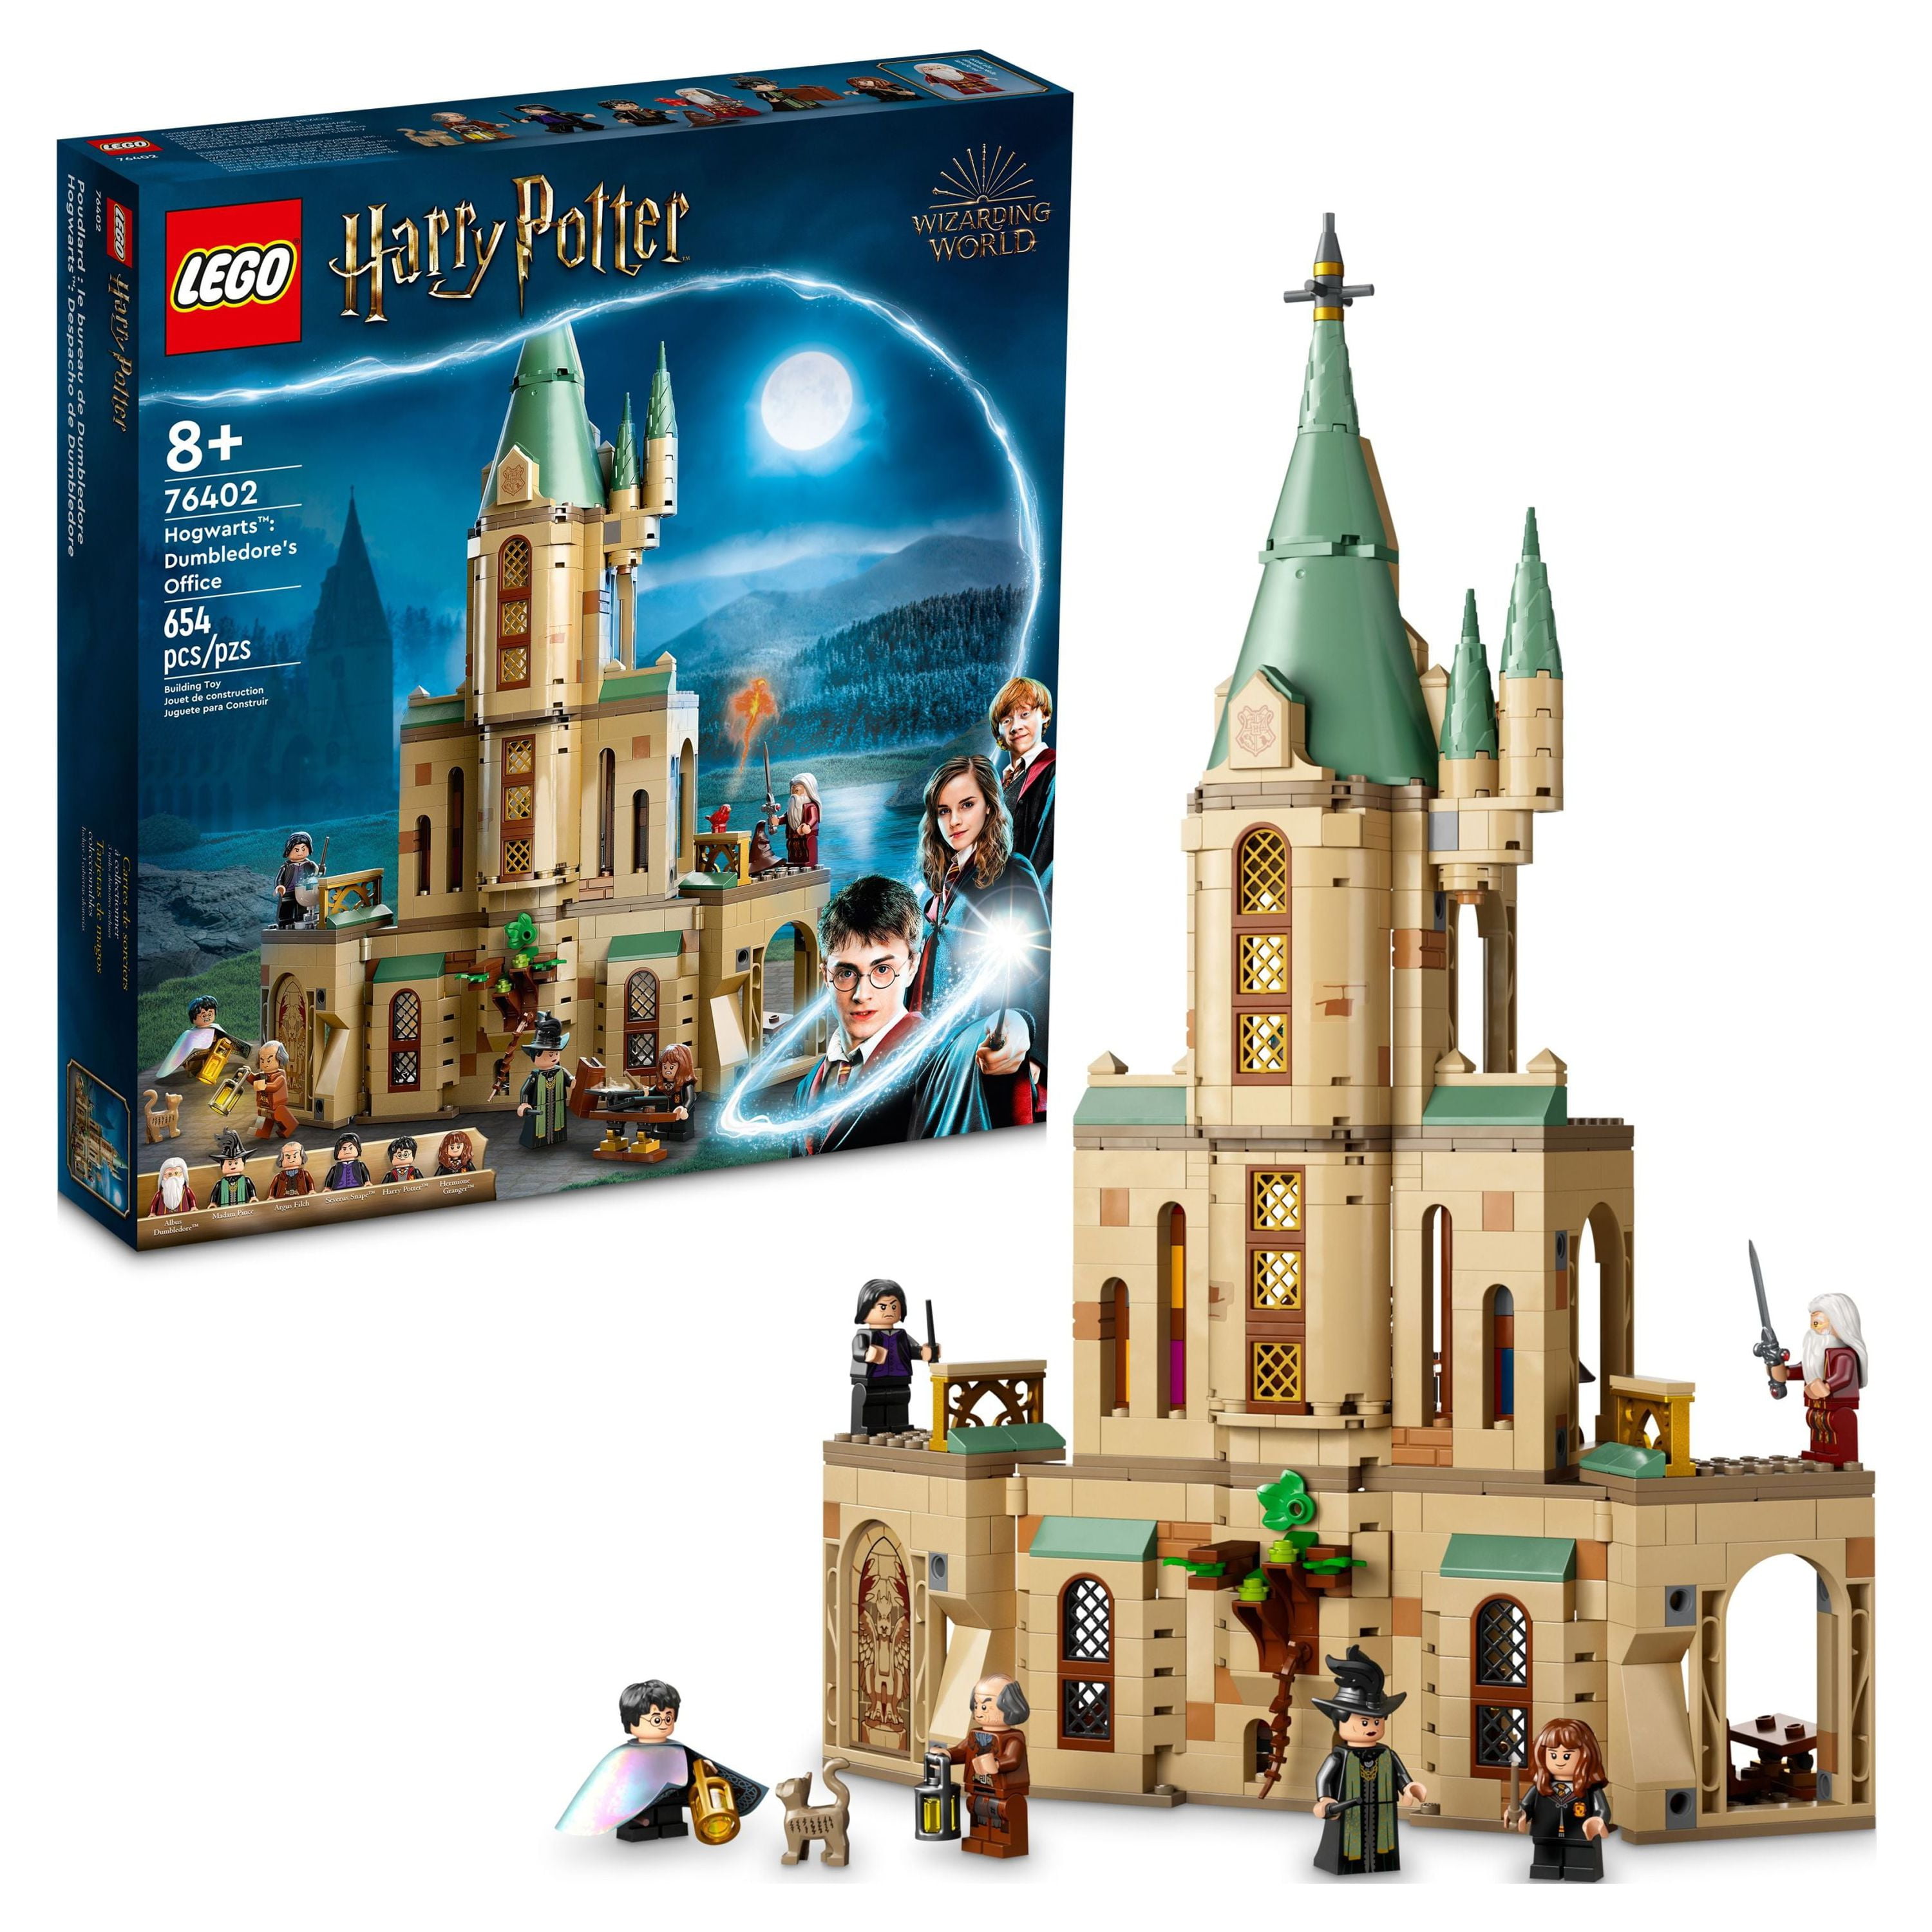 LEGO Harry Potter Hogwarts: Dumbledore's Office 76402 Castle Toy, Set with  Sorting Hat, Sword of Gryffindor and 6 Minifigures, for Kids Aged 8 Plus 